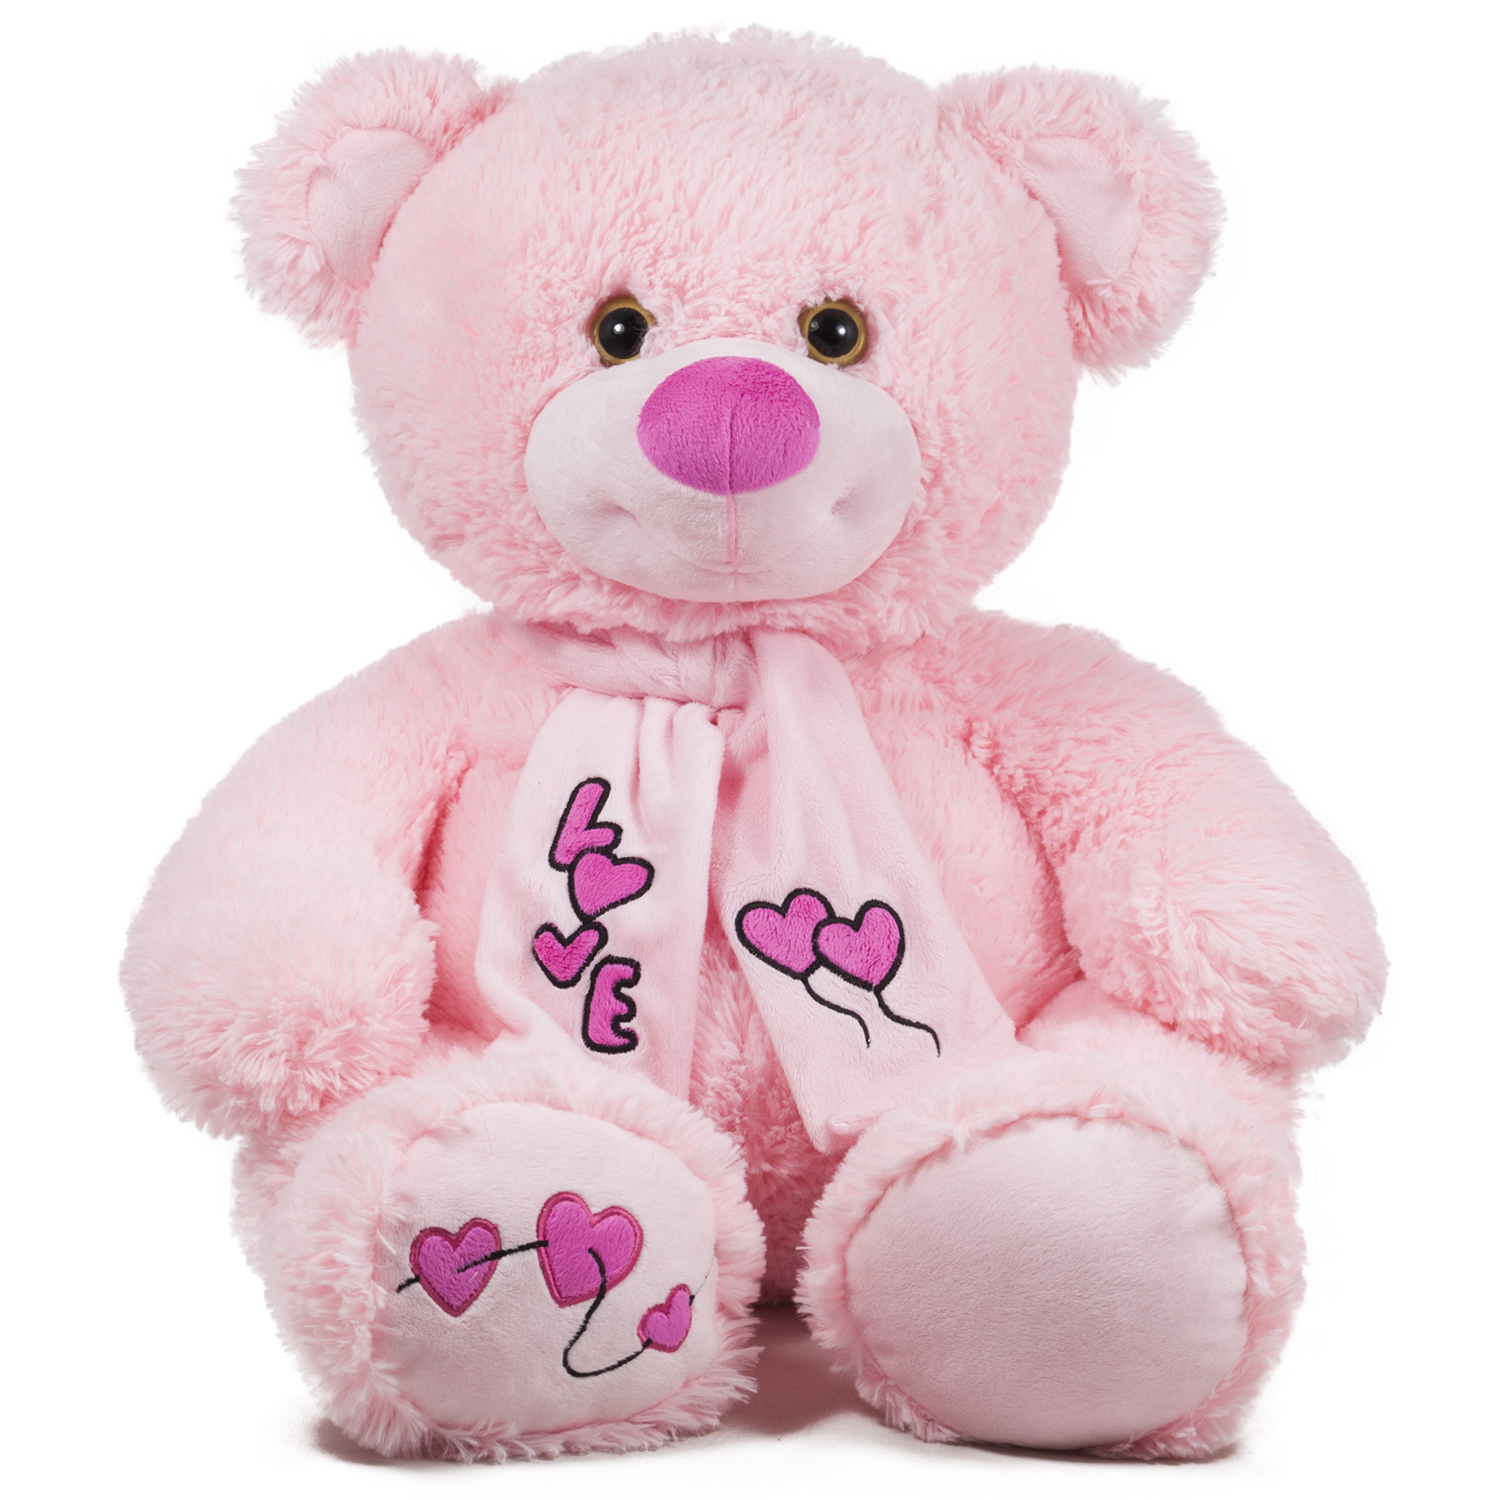 Bear with Scarf - Pink